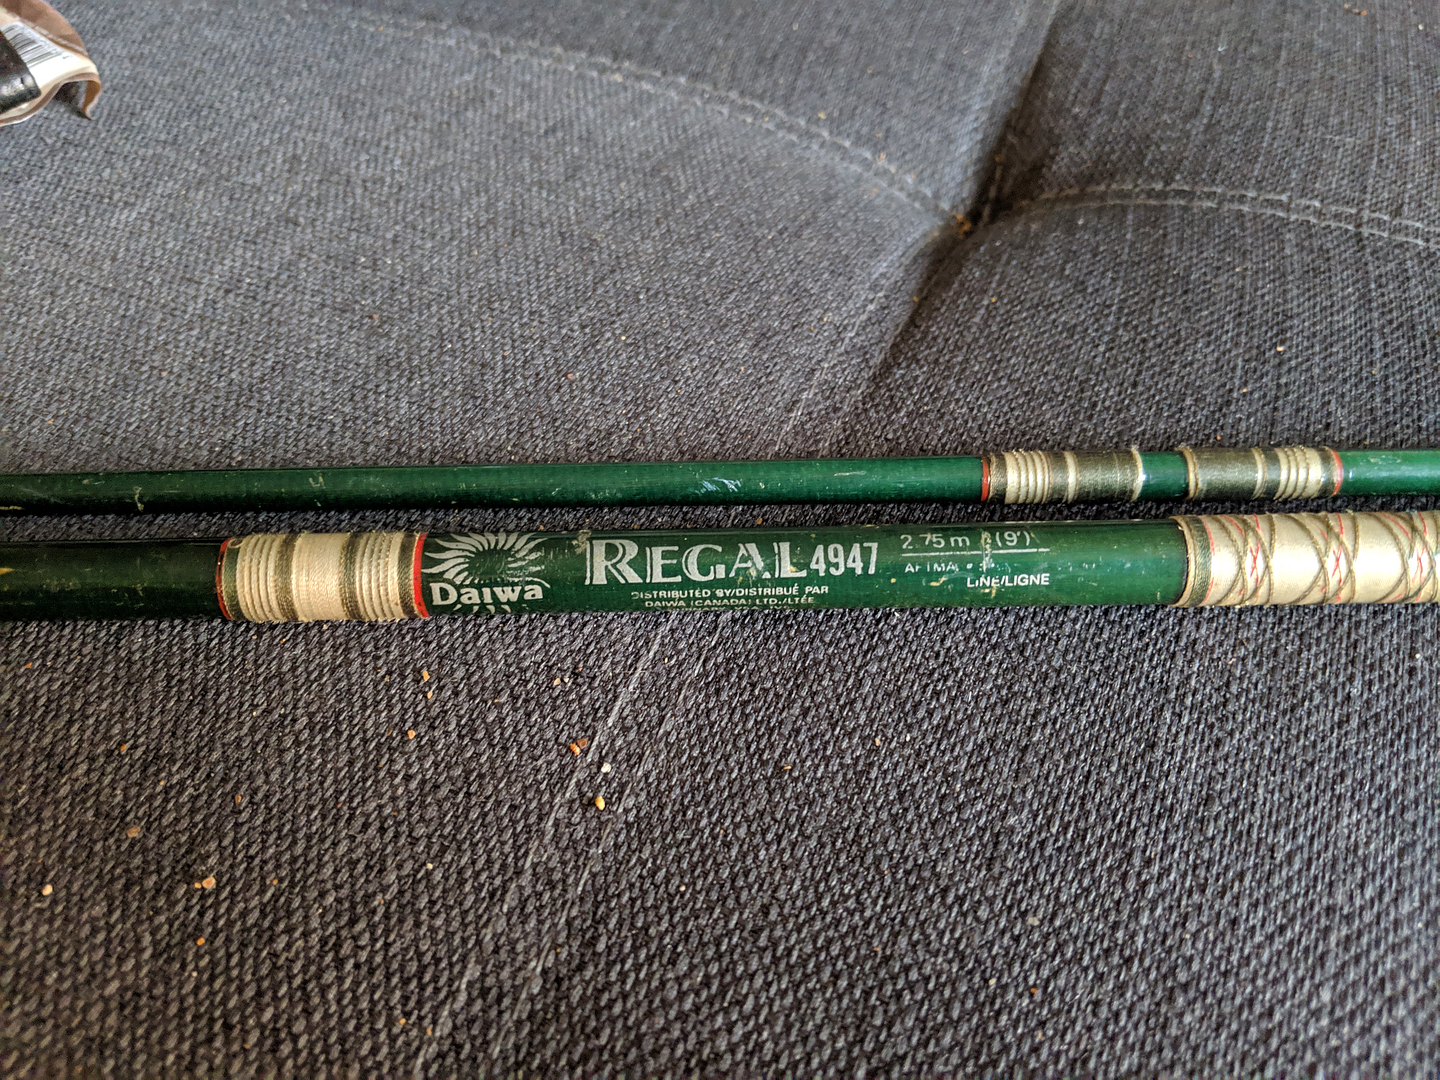 Regal fly rod, Collecting Fiberglass Fly Rods